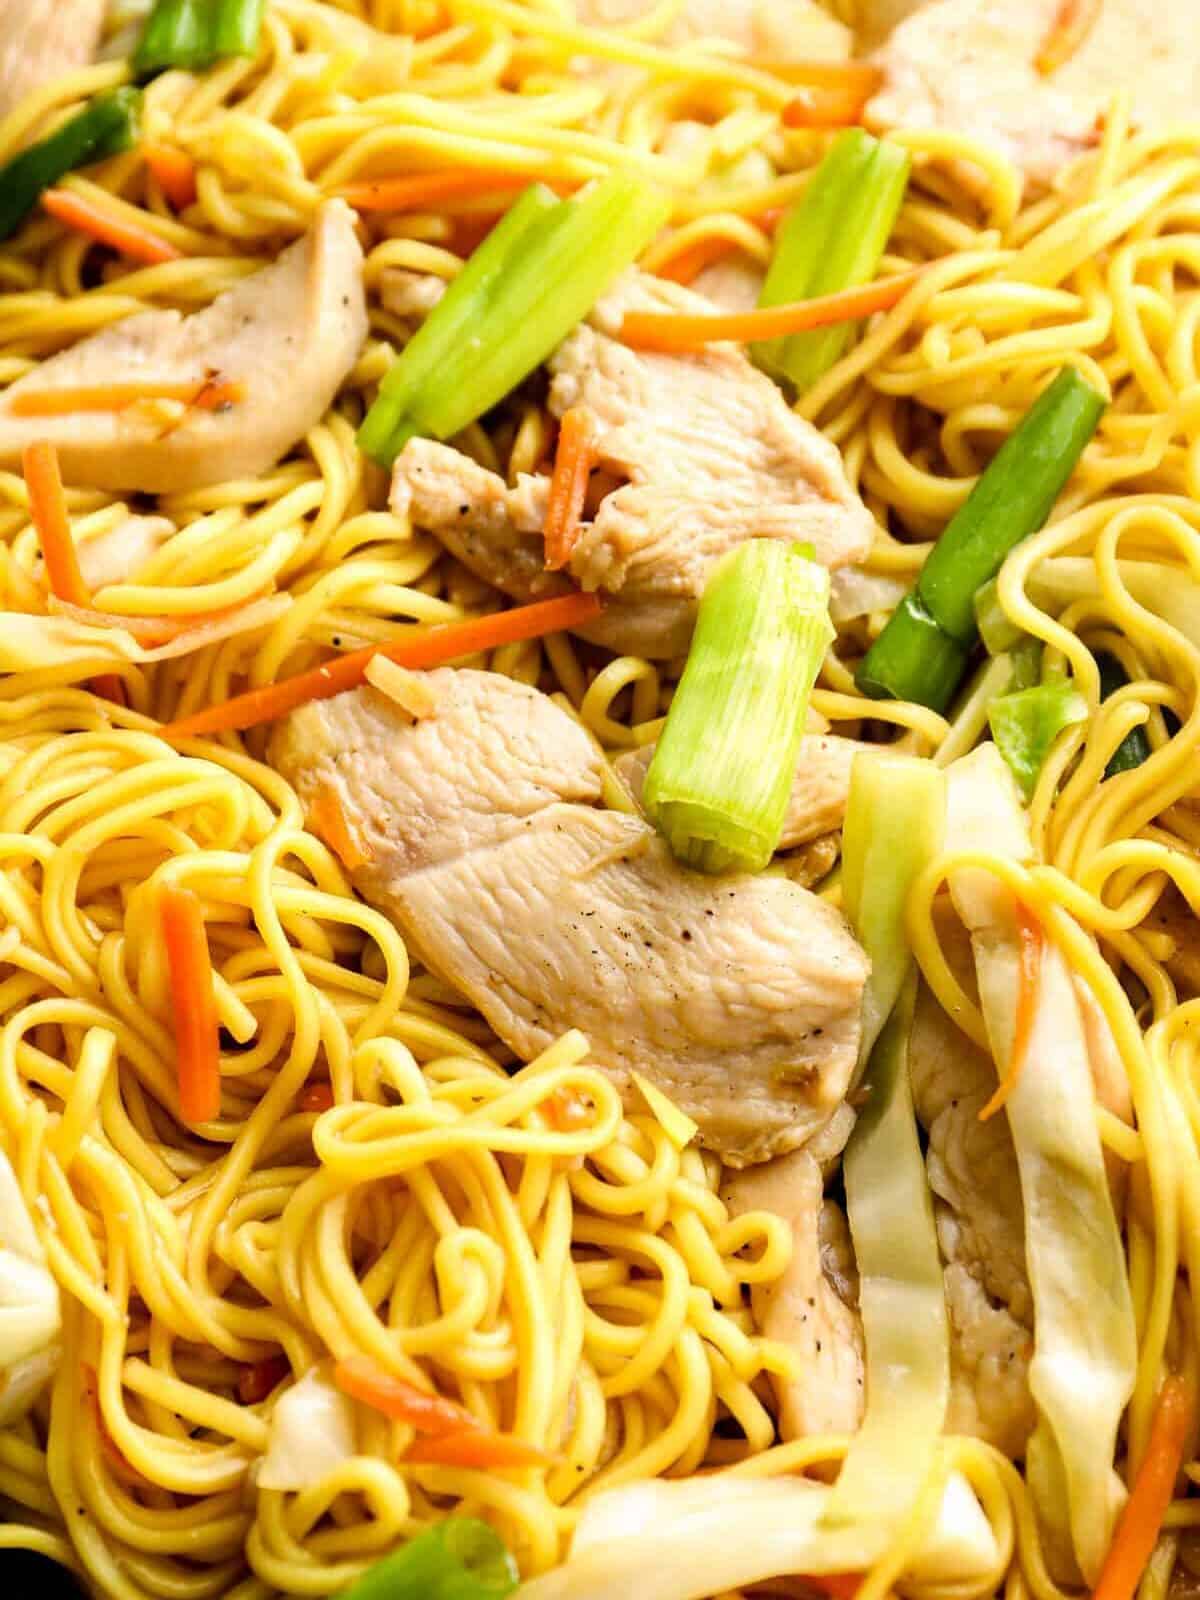 up close image of cooked chicken chow mein